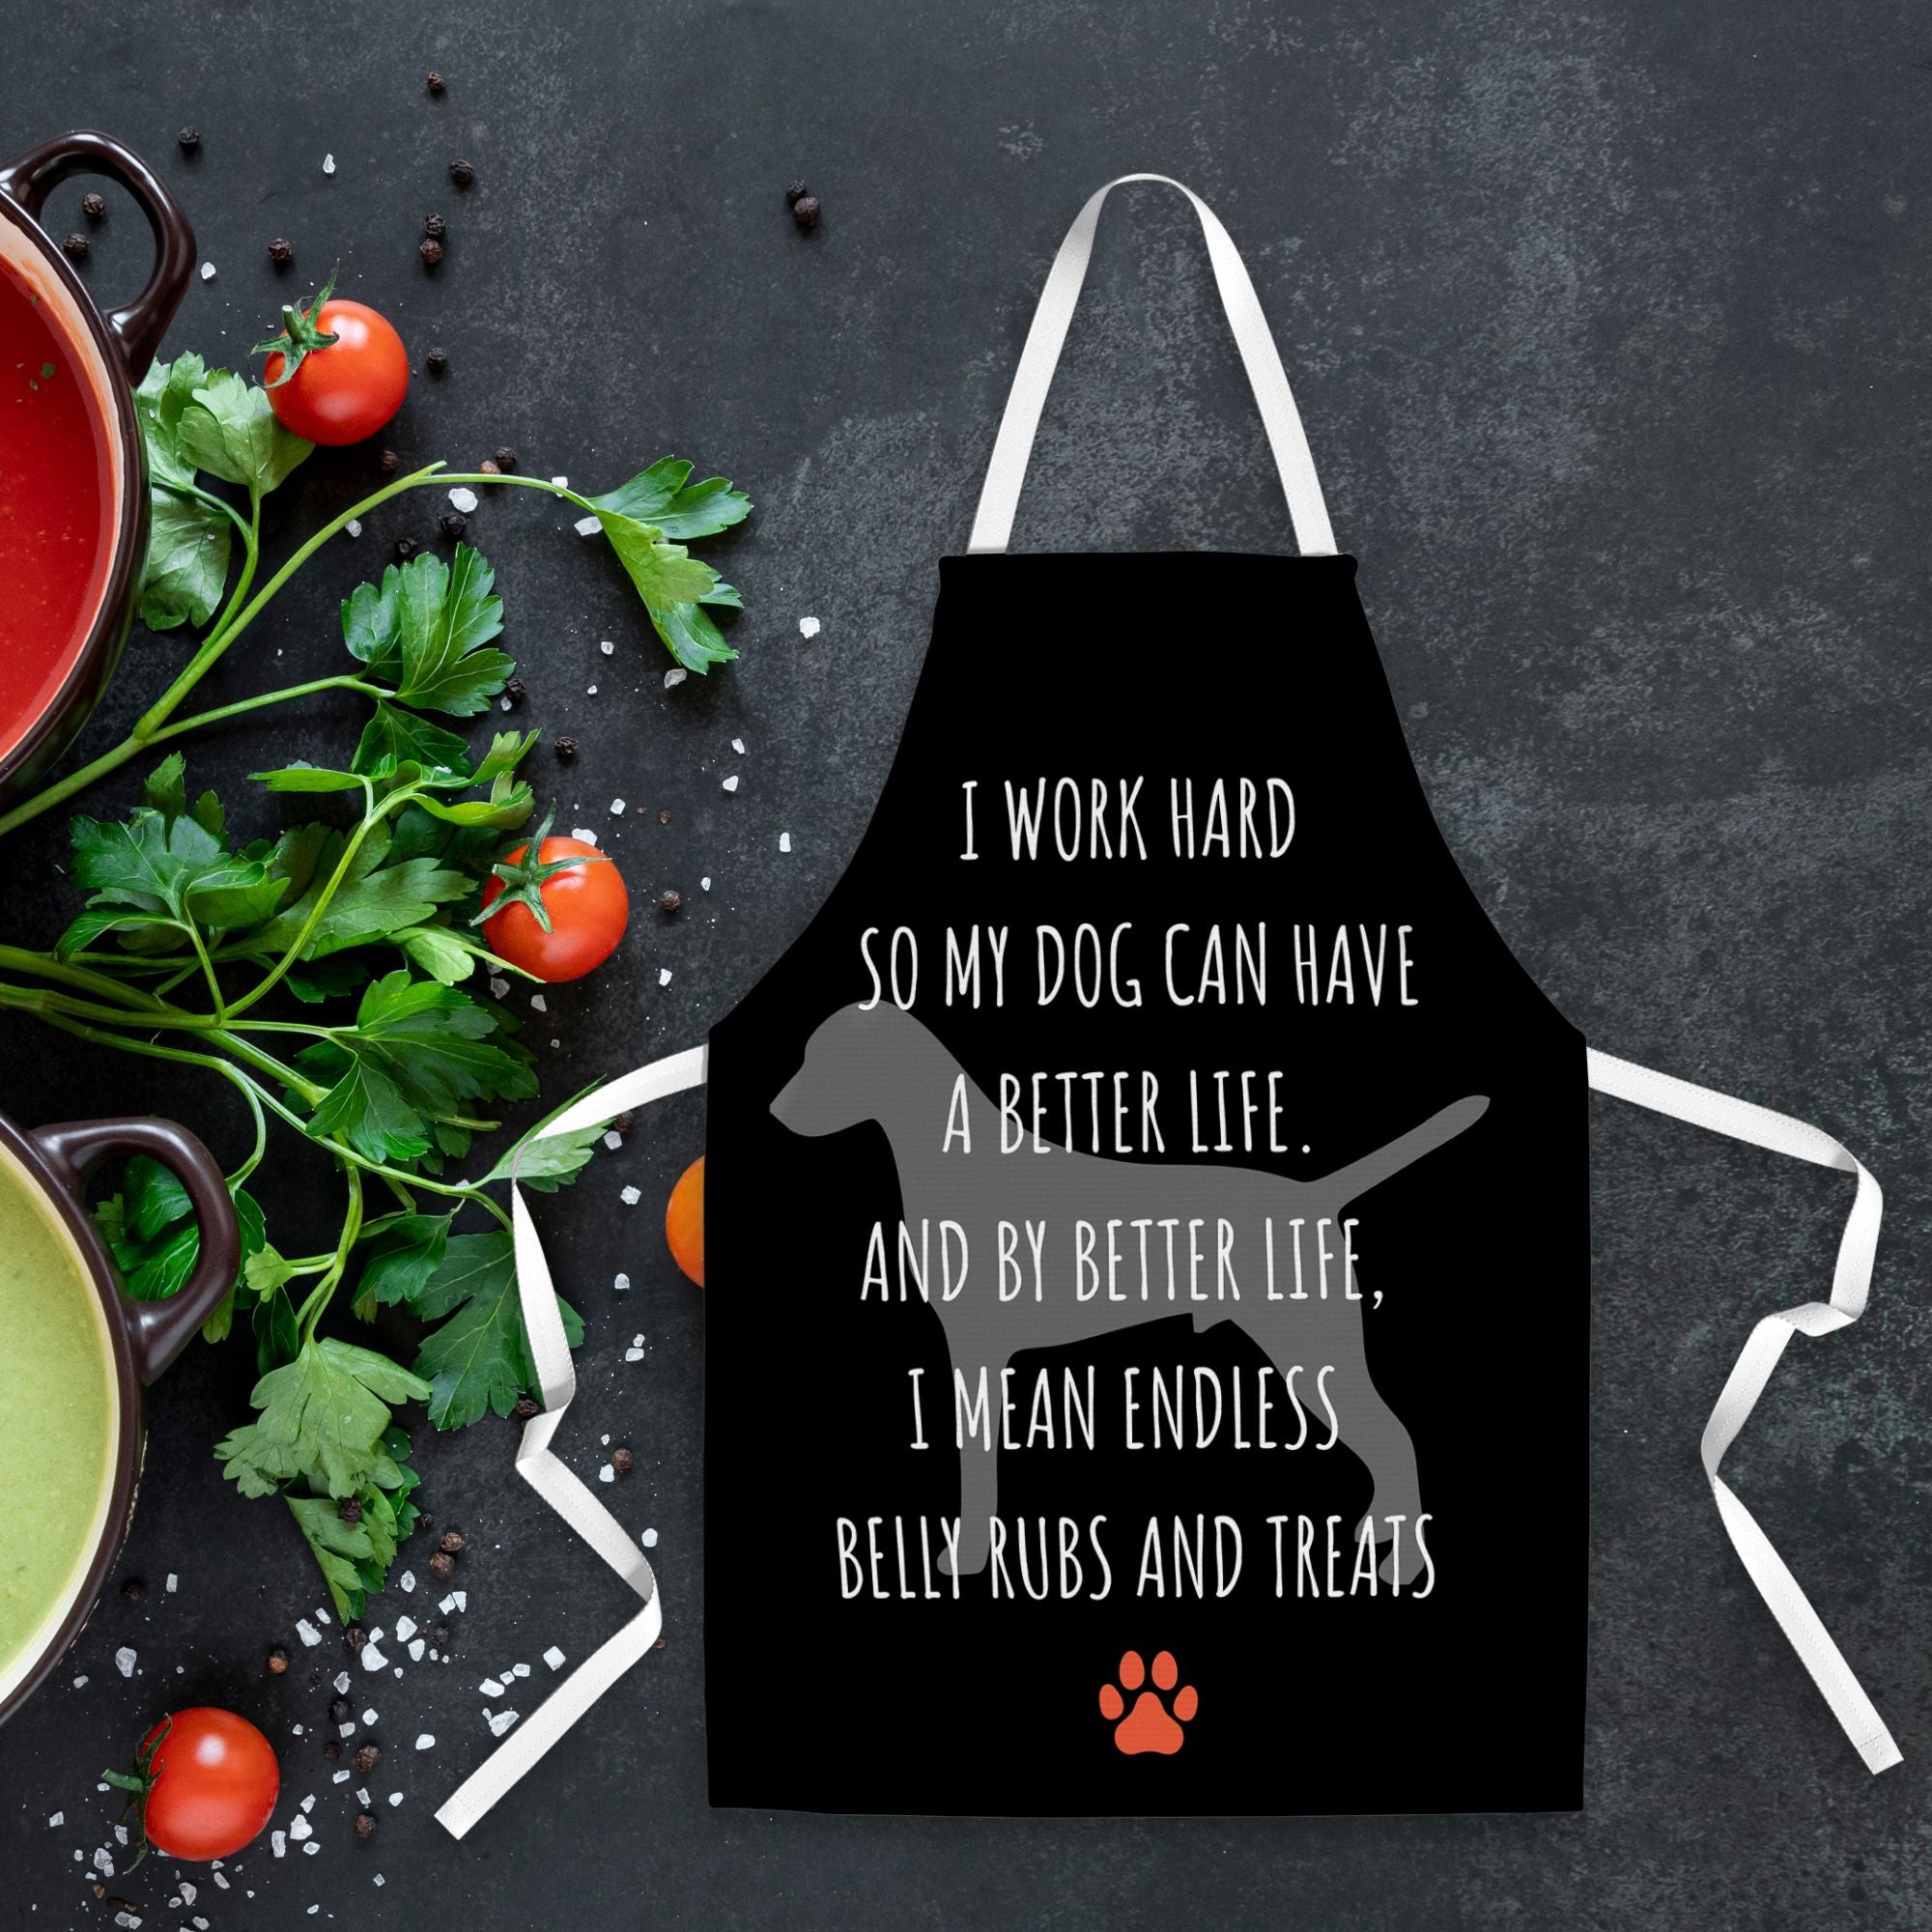 Funny Apron Dog Lover Gift - Sweetie